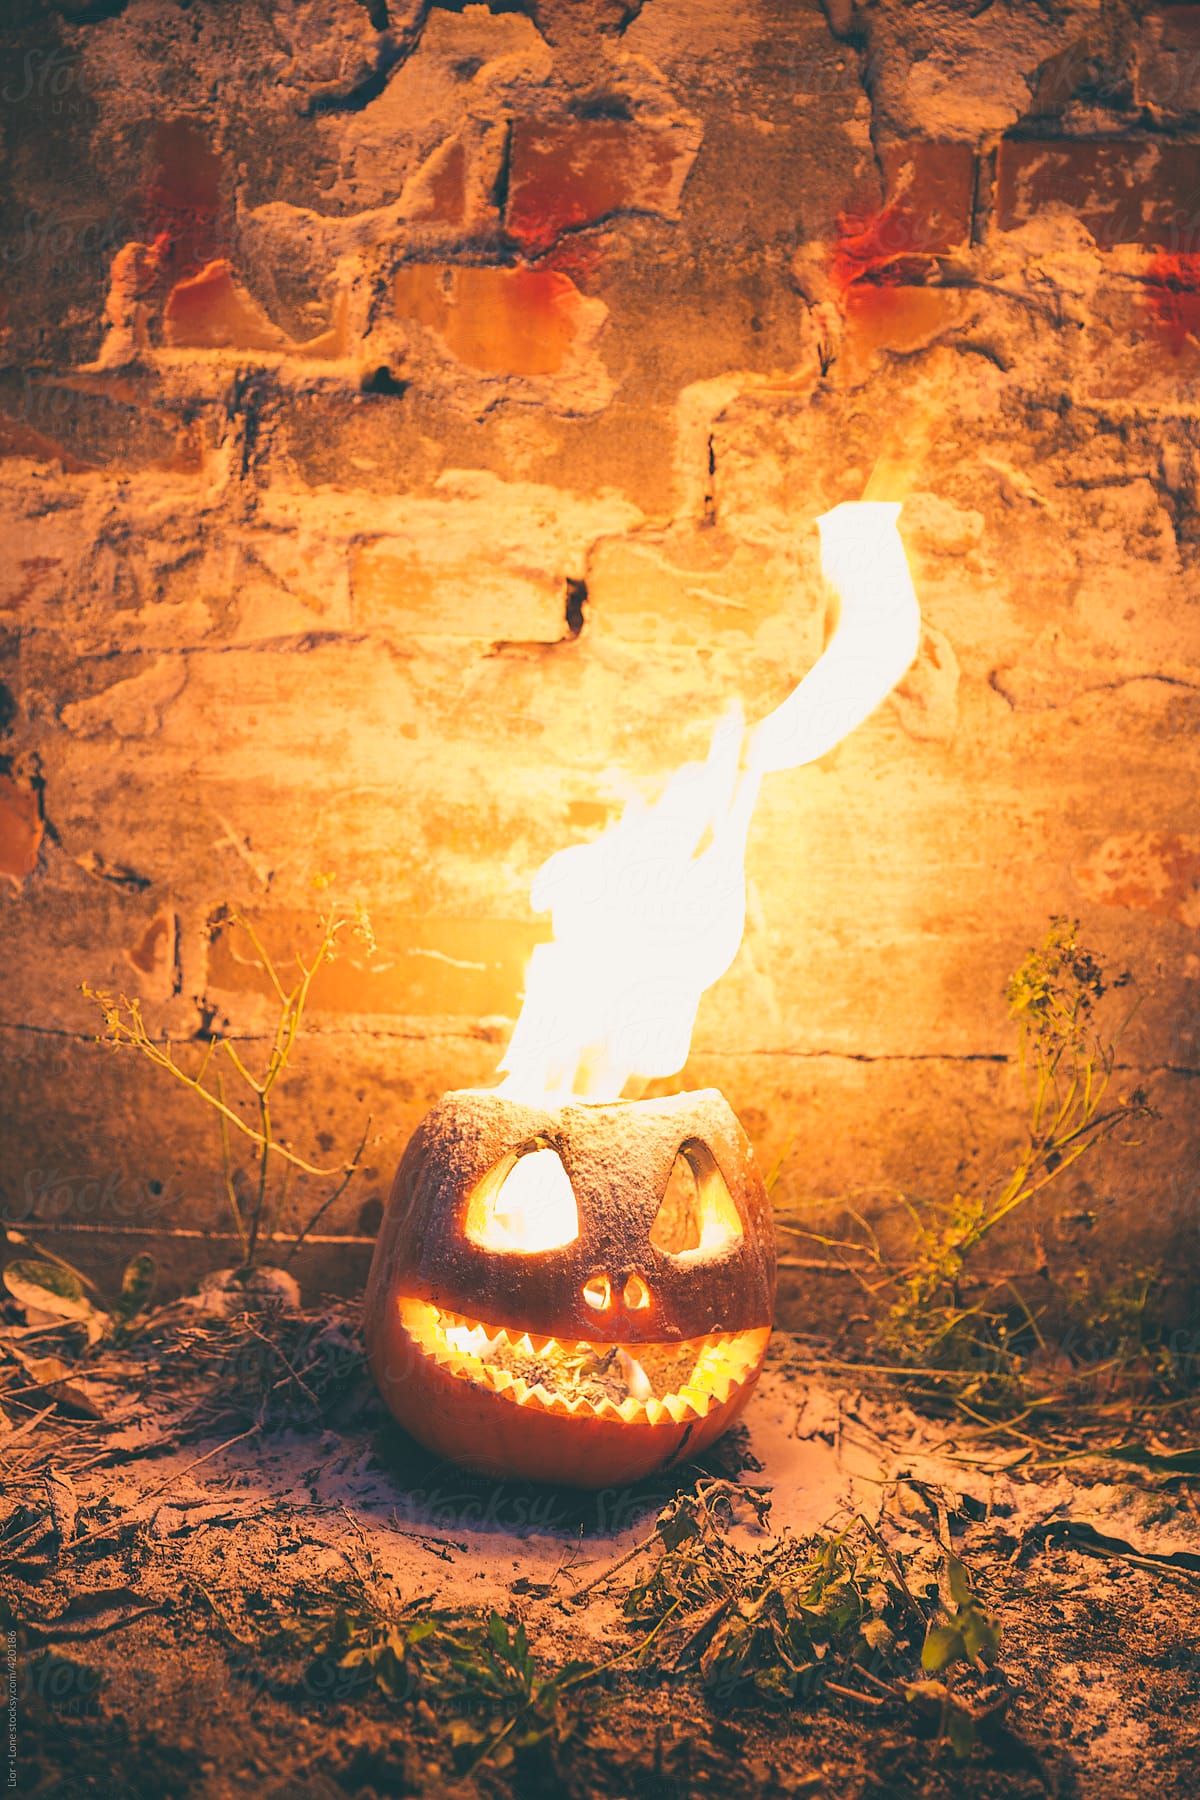 Flame of fire coming out of carved Halloween pumkin